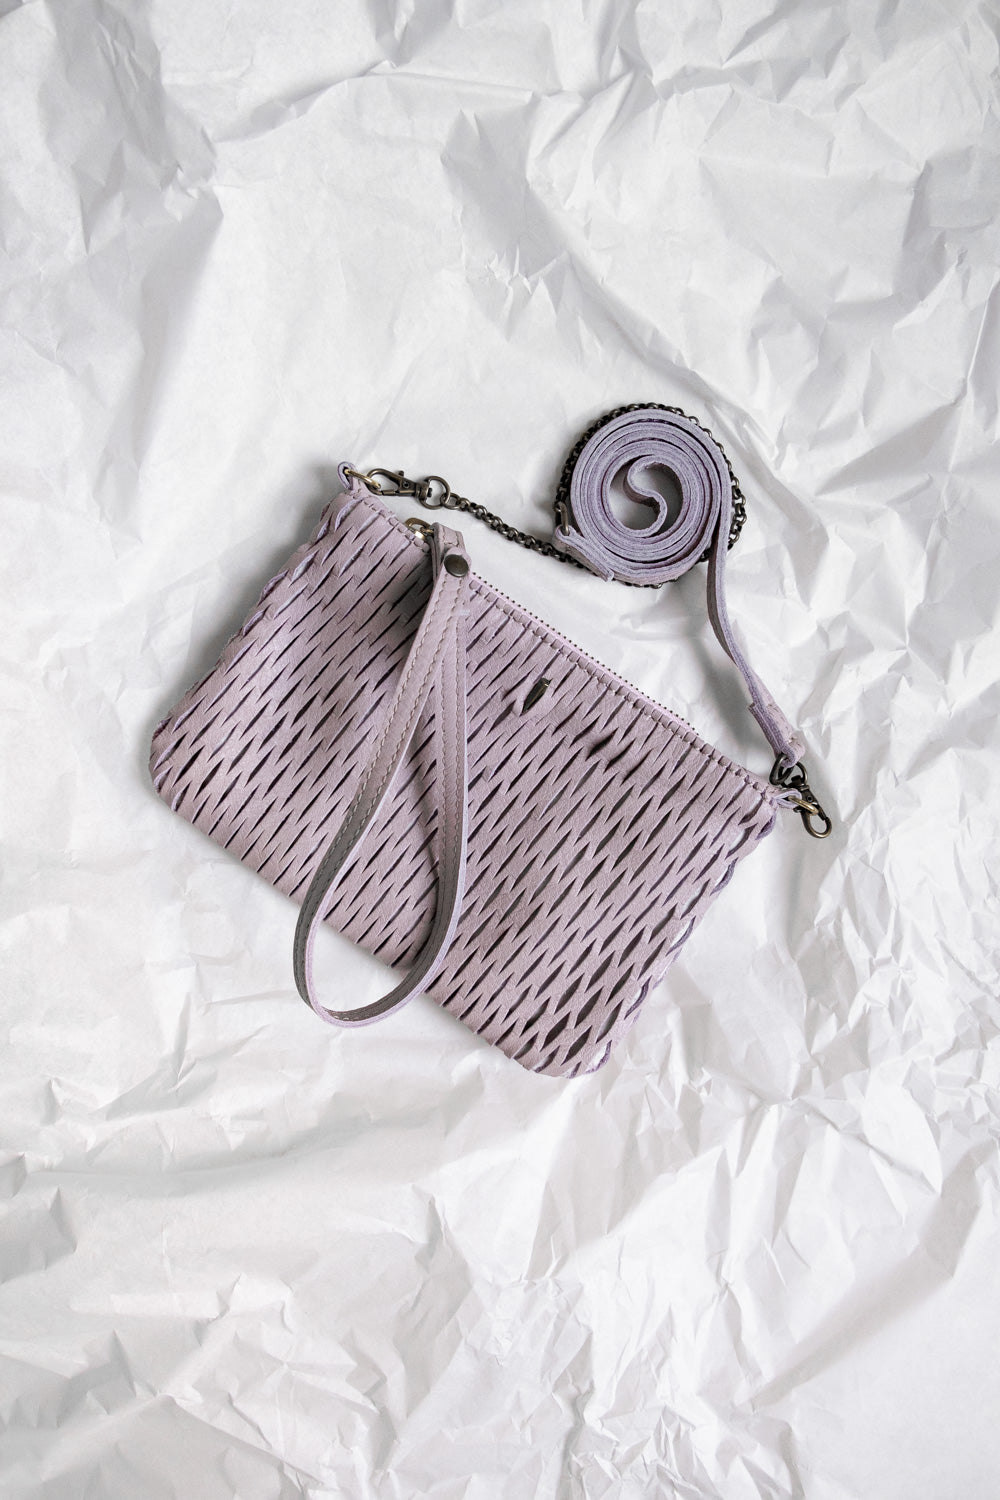 Tina pochette in orchid perforated leather